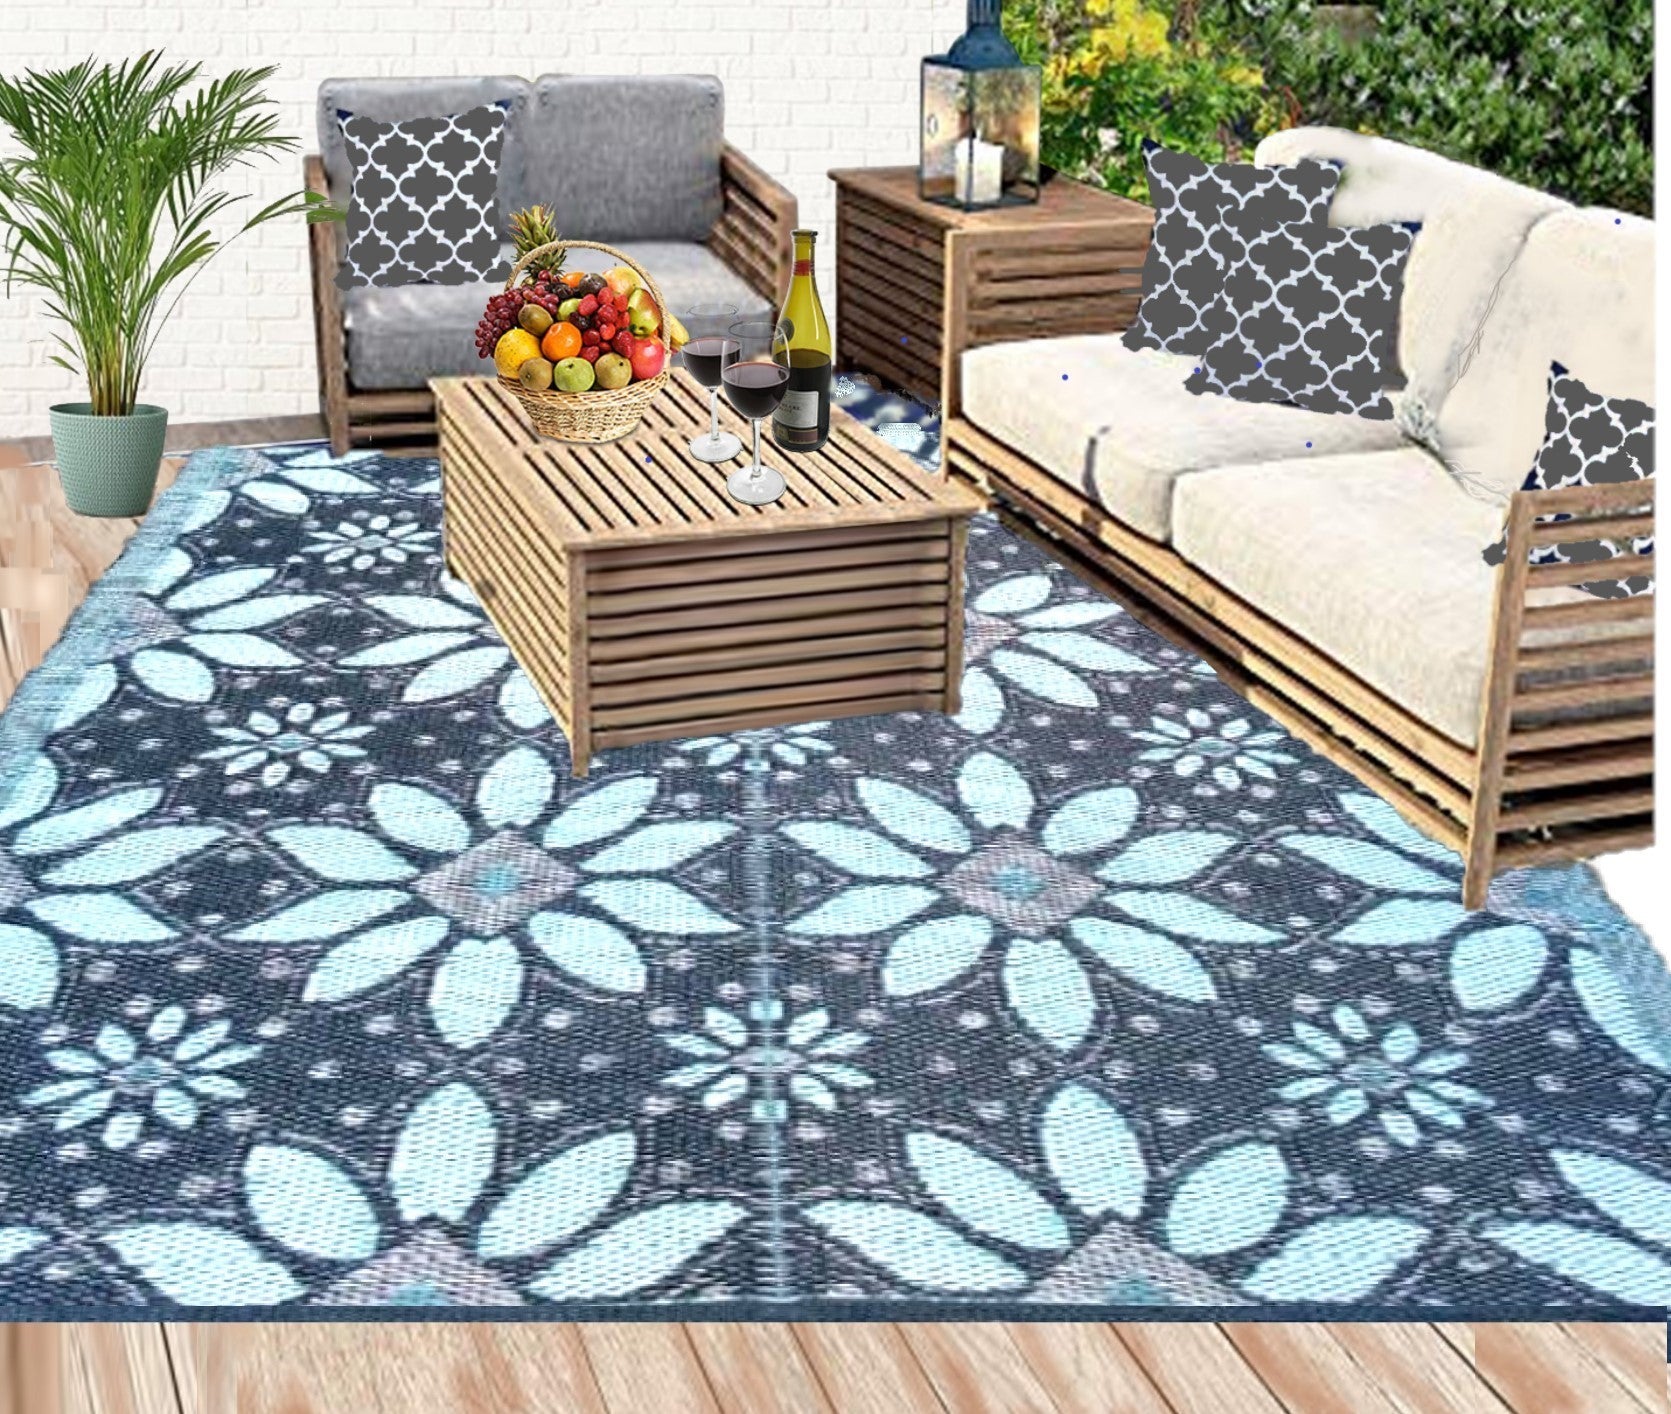 Outdoor Patio Rugs clearance Navy Blue, Grey, White color using at floor to decorate house